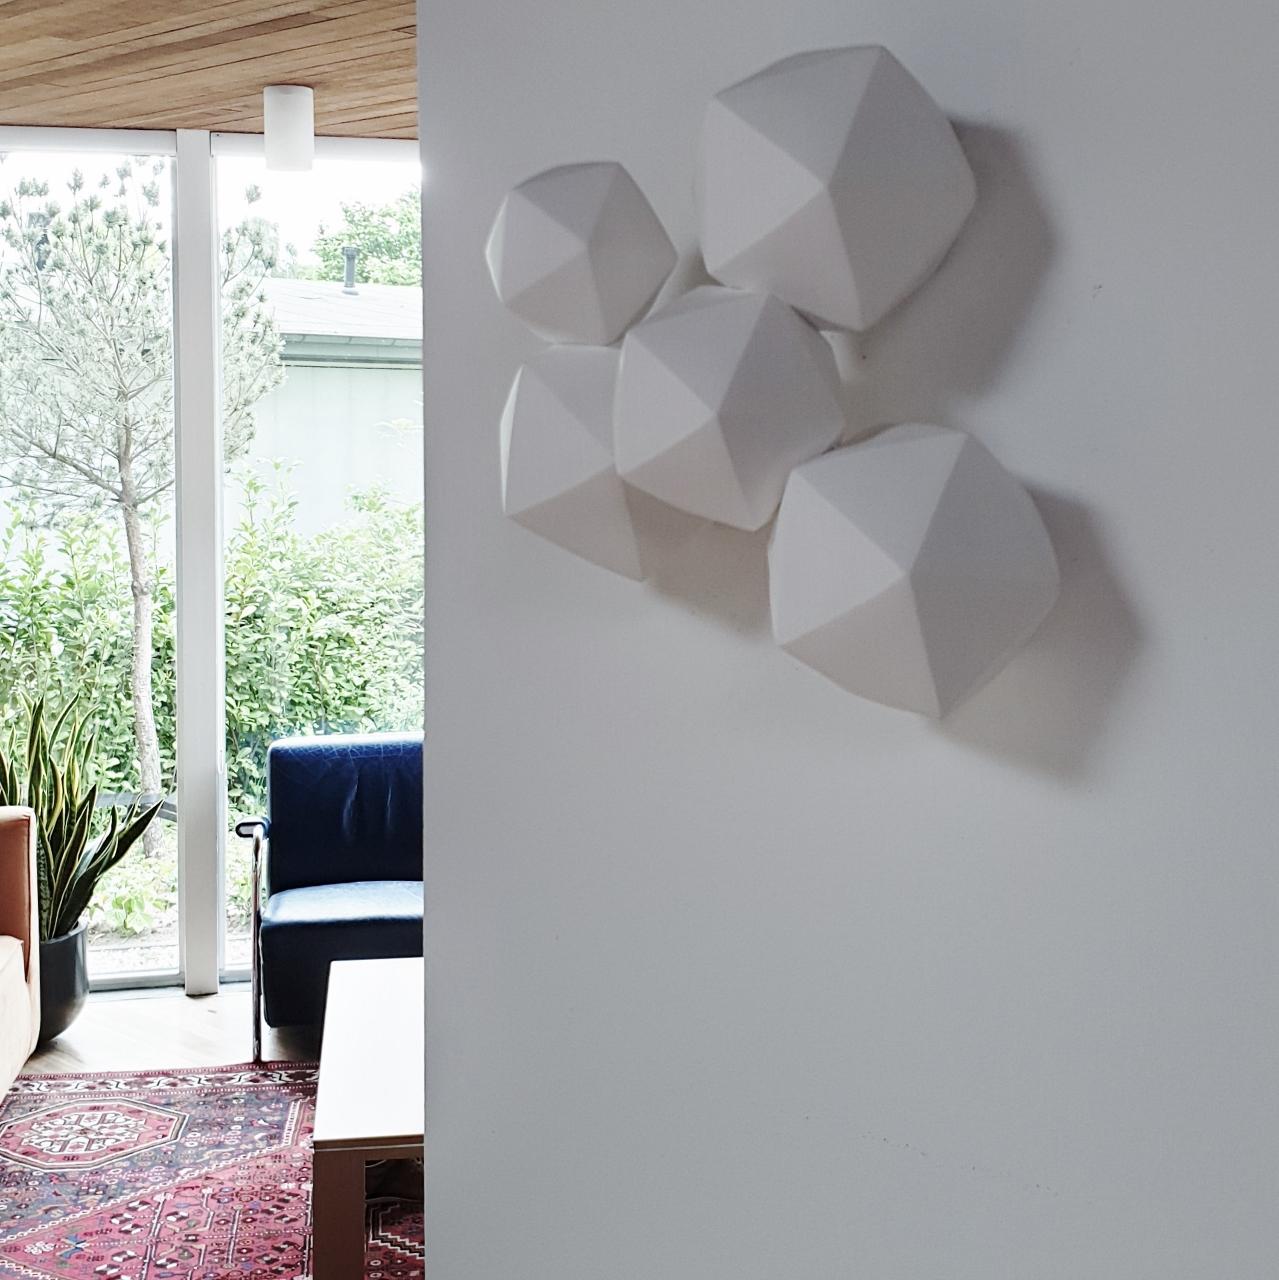 Icosahedron 5 - contemporary modern abstract geometric ceramic wall sculpture - Sculpture by Mo Cornelisse